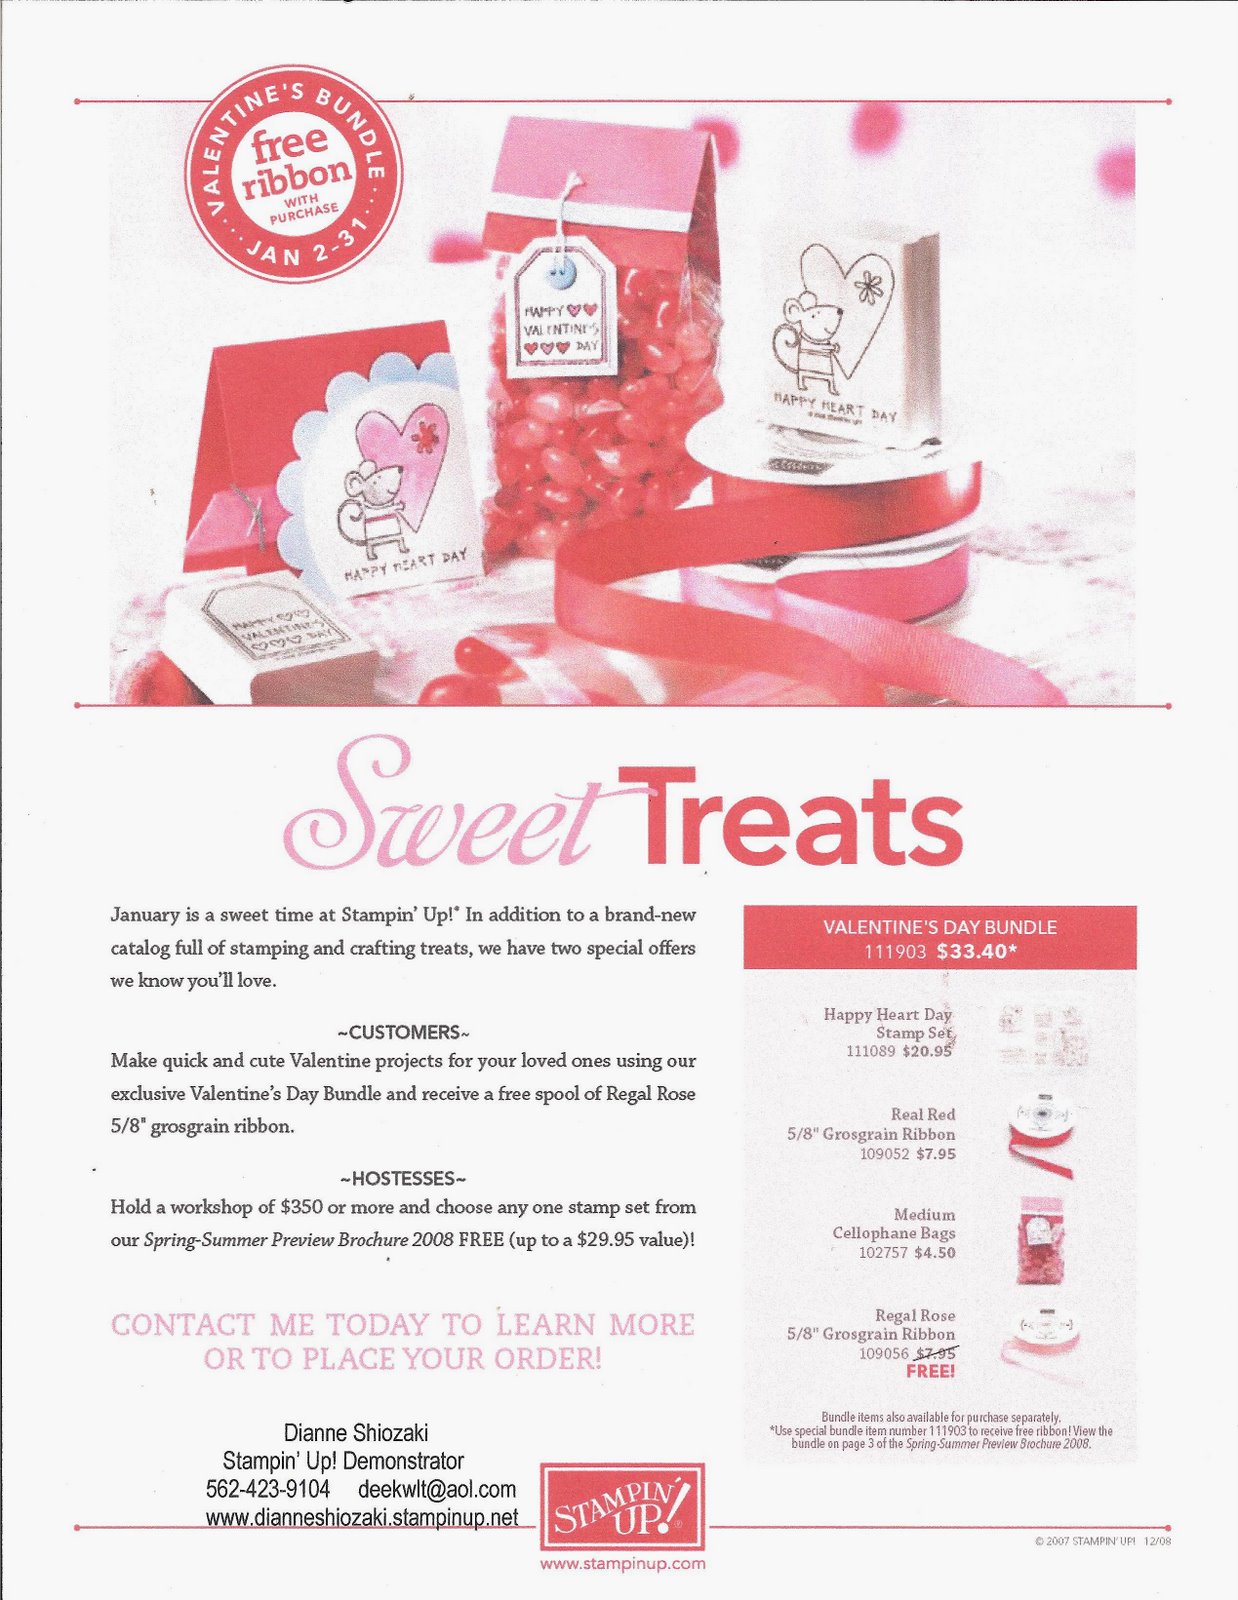 [Stampin+Up+Promotions+Valentines.jpg]